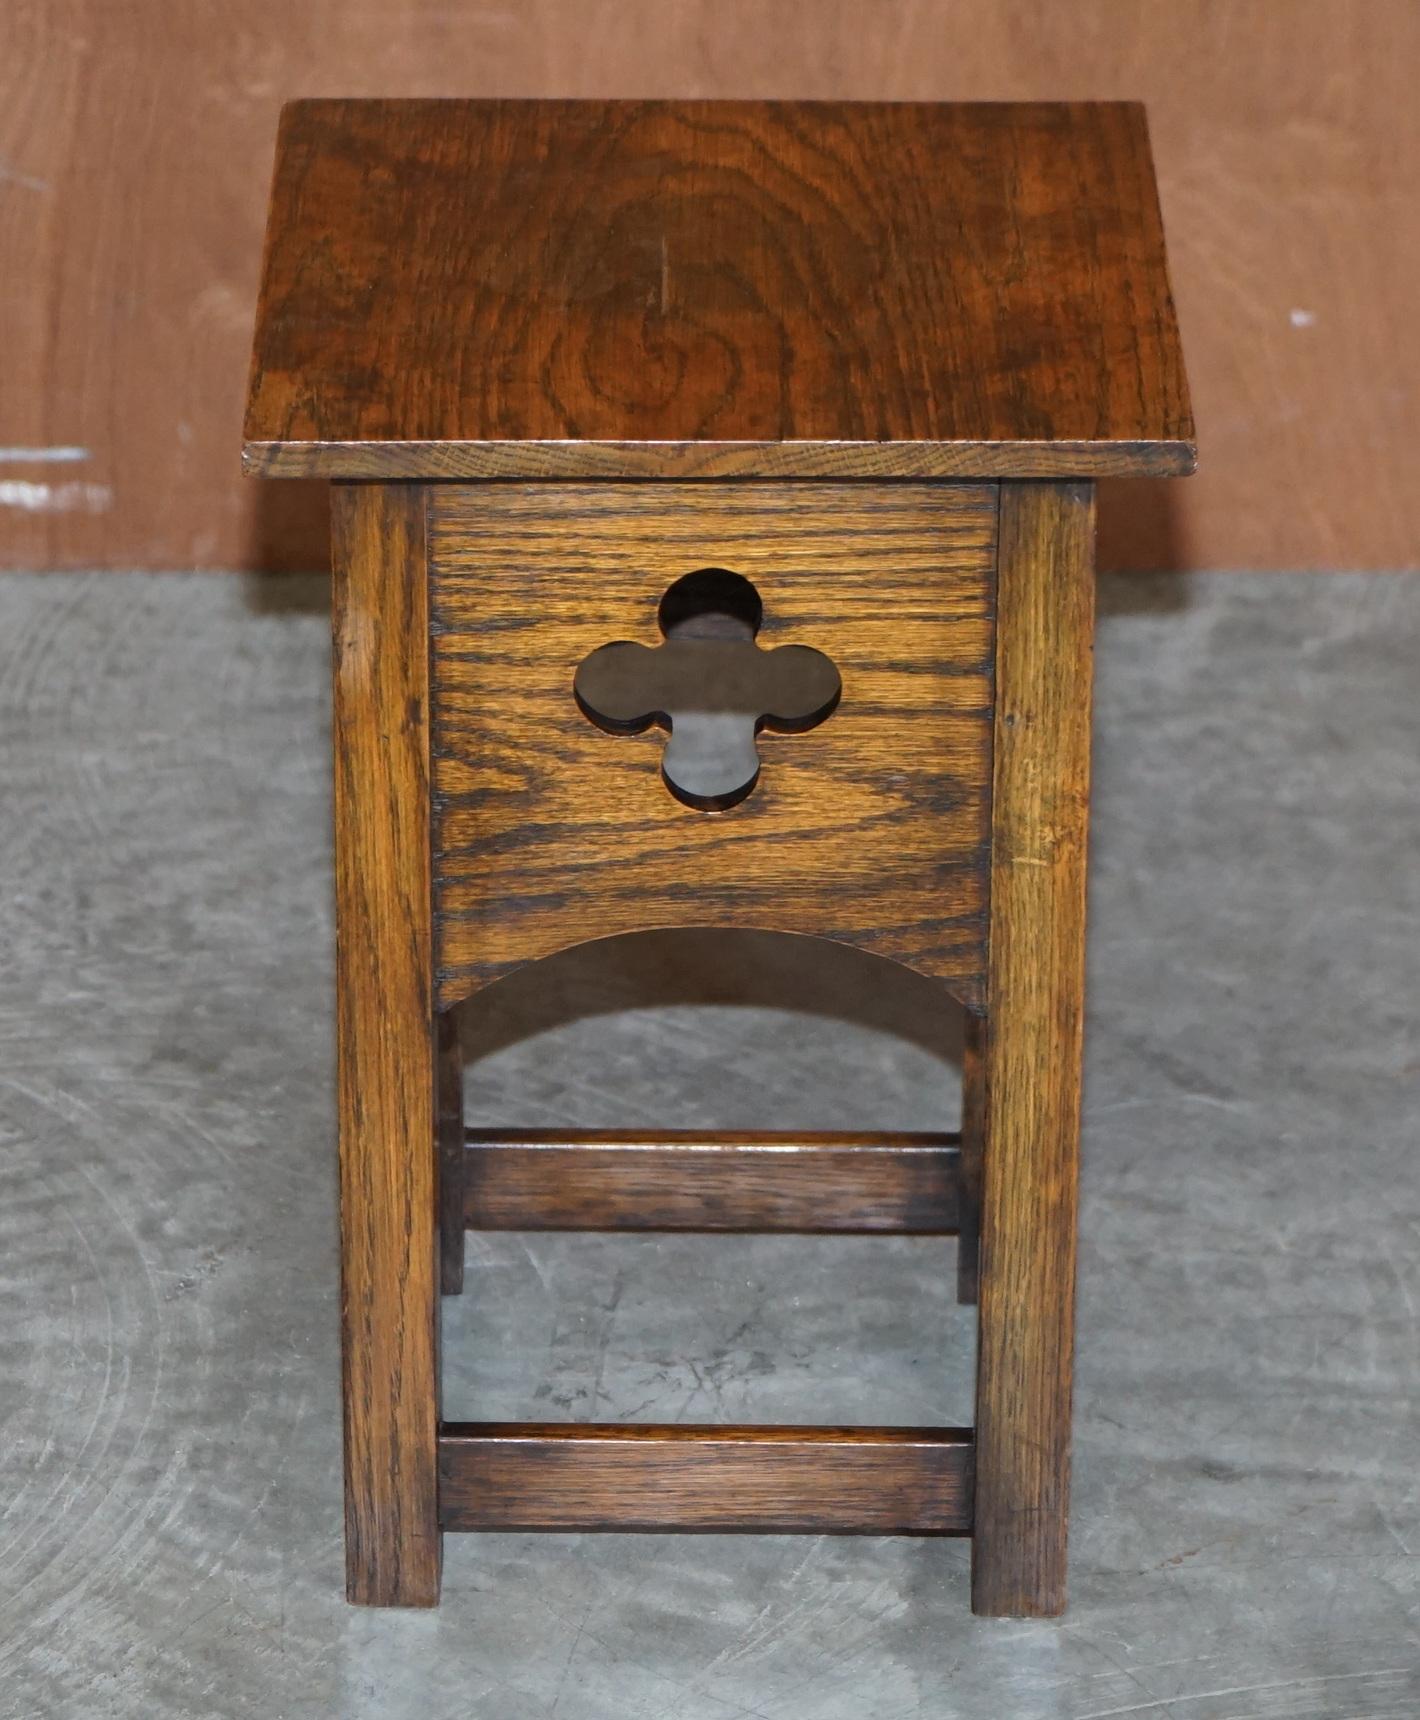 We are delighted to offer for sale this lovely vintage English Oak Arts & Crafts side table

A good looking and well made piece, the timber patina is natural and unpolished, it has a nice rich warm glow to it

Condition wise we have deep cleaned